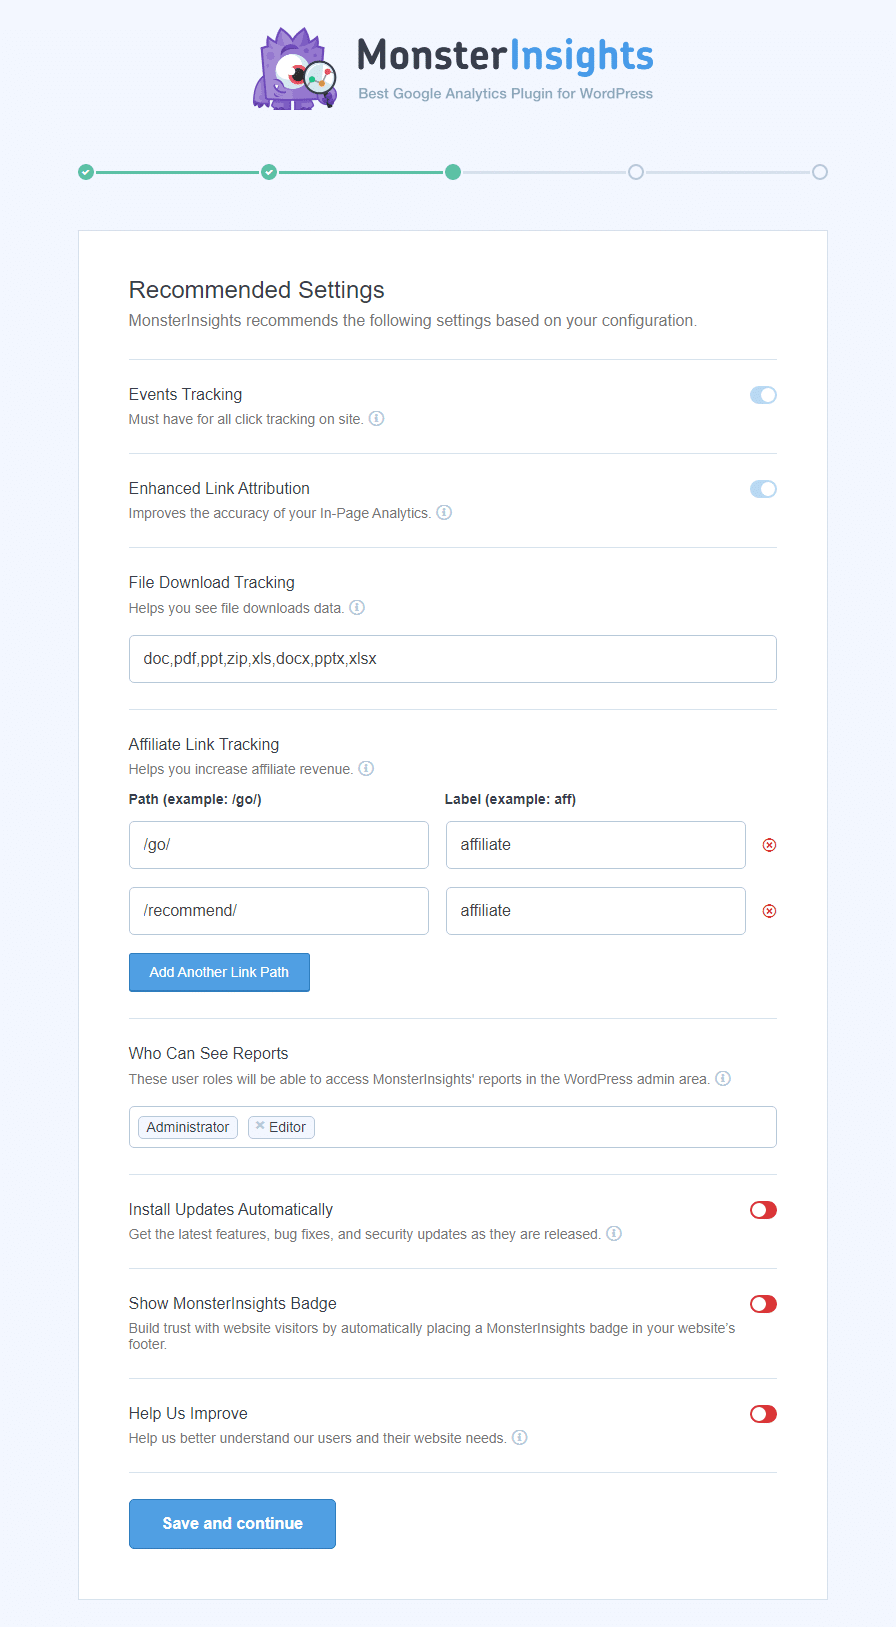 Configuring MonsterInsights Recommended Settings